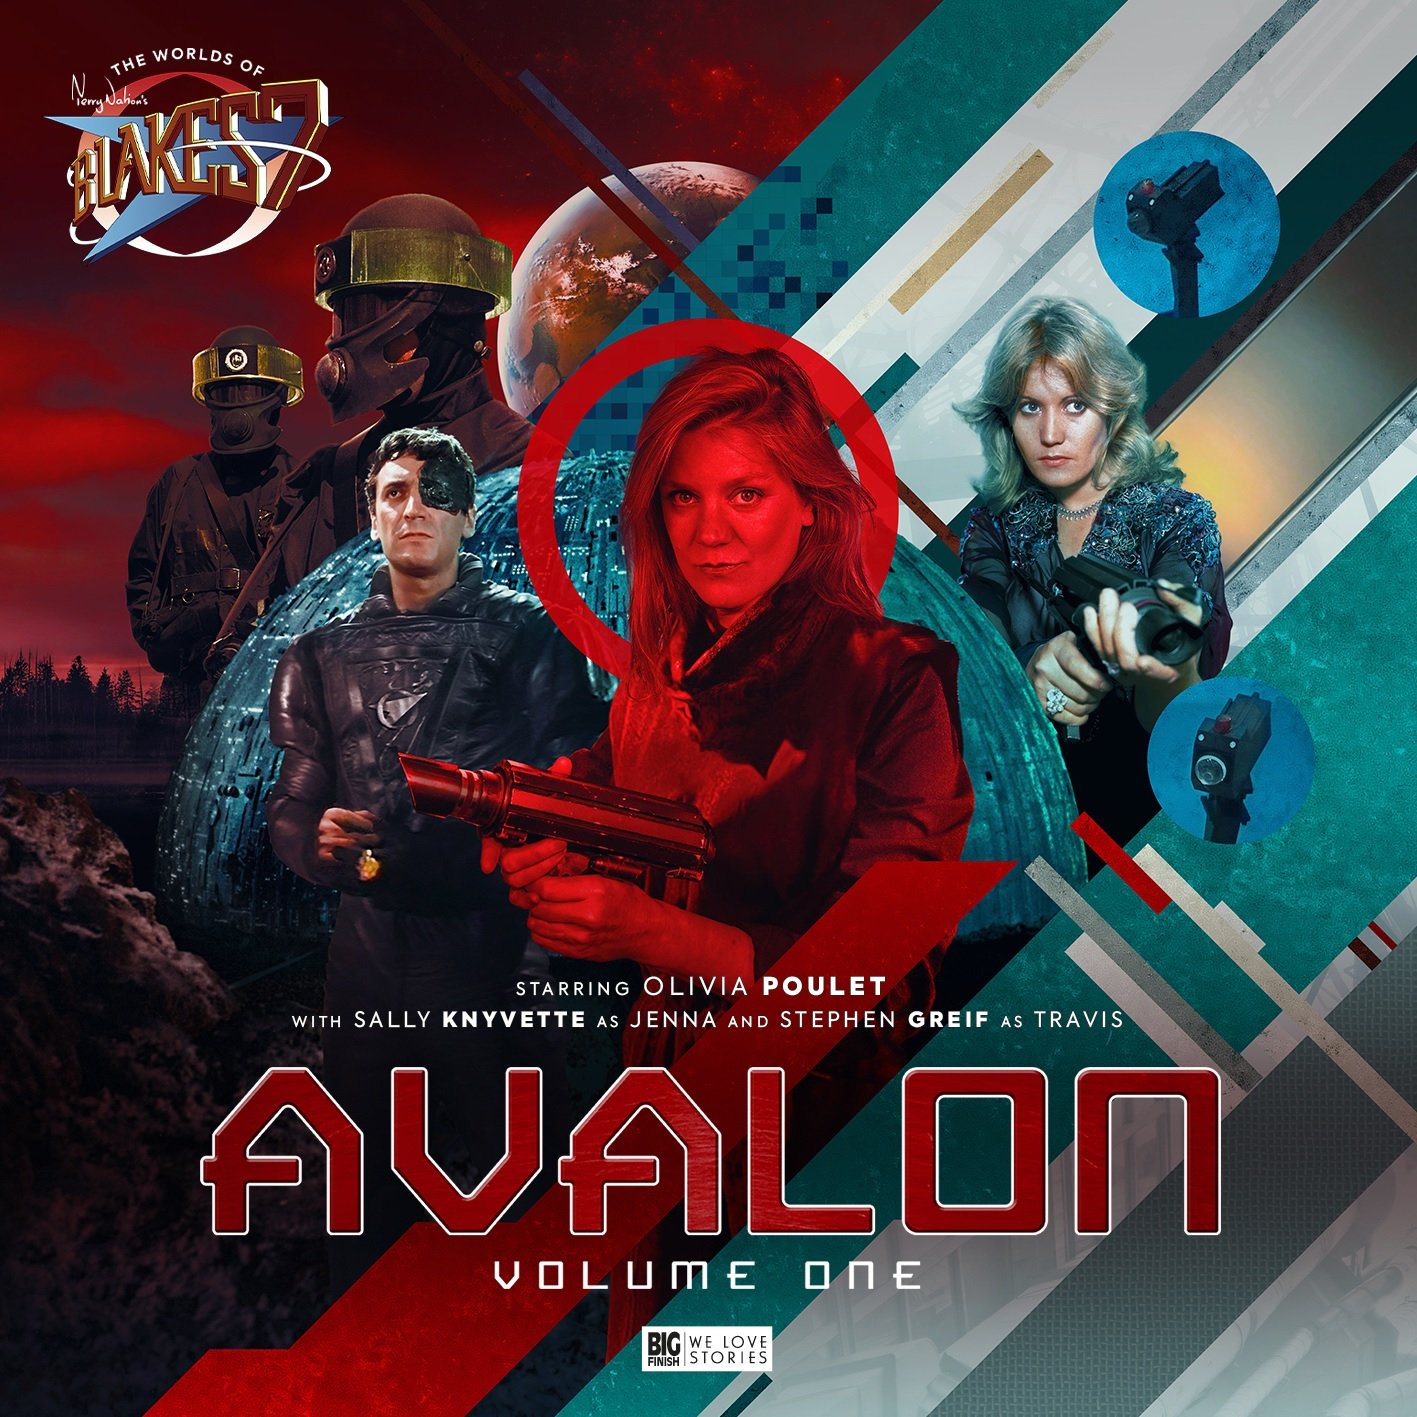 Out Now: Big Finish’s The Worlds of Blake’s 7 Launches with Avalon Volume 1